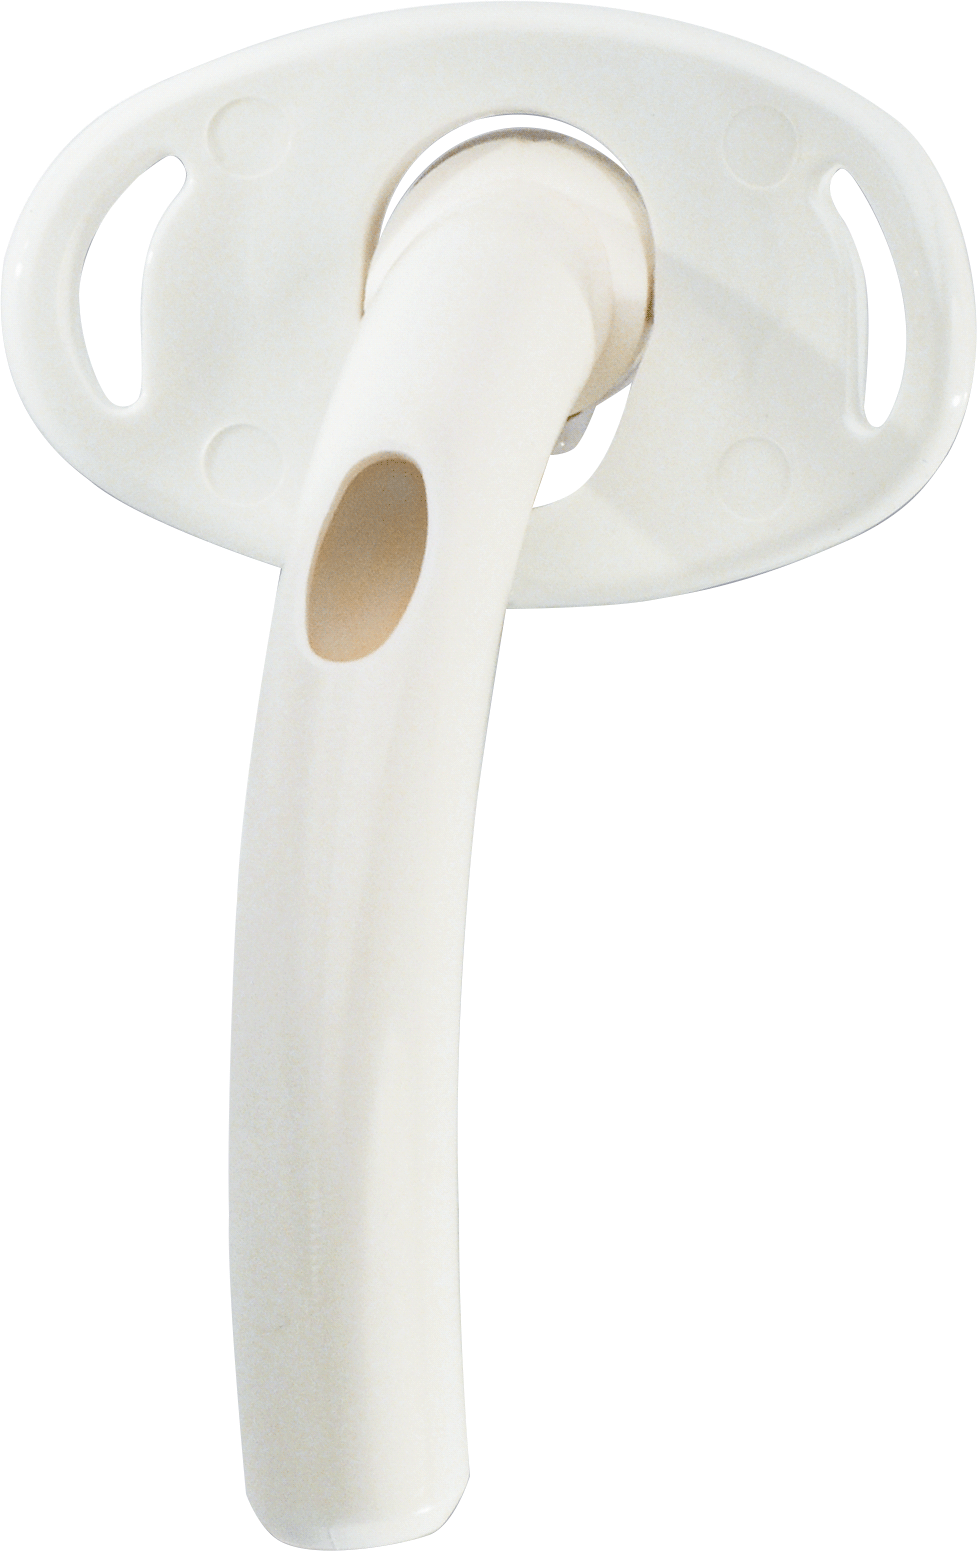 EA/1 - Mallinckrodt Medical Inc Shiley&trade; Fenestrated Reusable Cannula Cuffless Tracheostomy Tube 8 Size 81mm L, 7-3/5mm I.D. x 7-3/5mm O.D., Designed for General Pulmonary Hygiene - Best Buy Medical Supplies